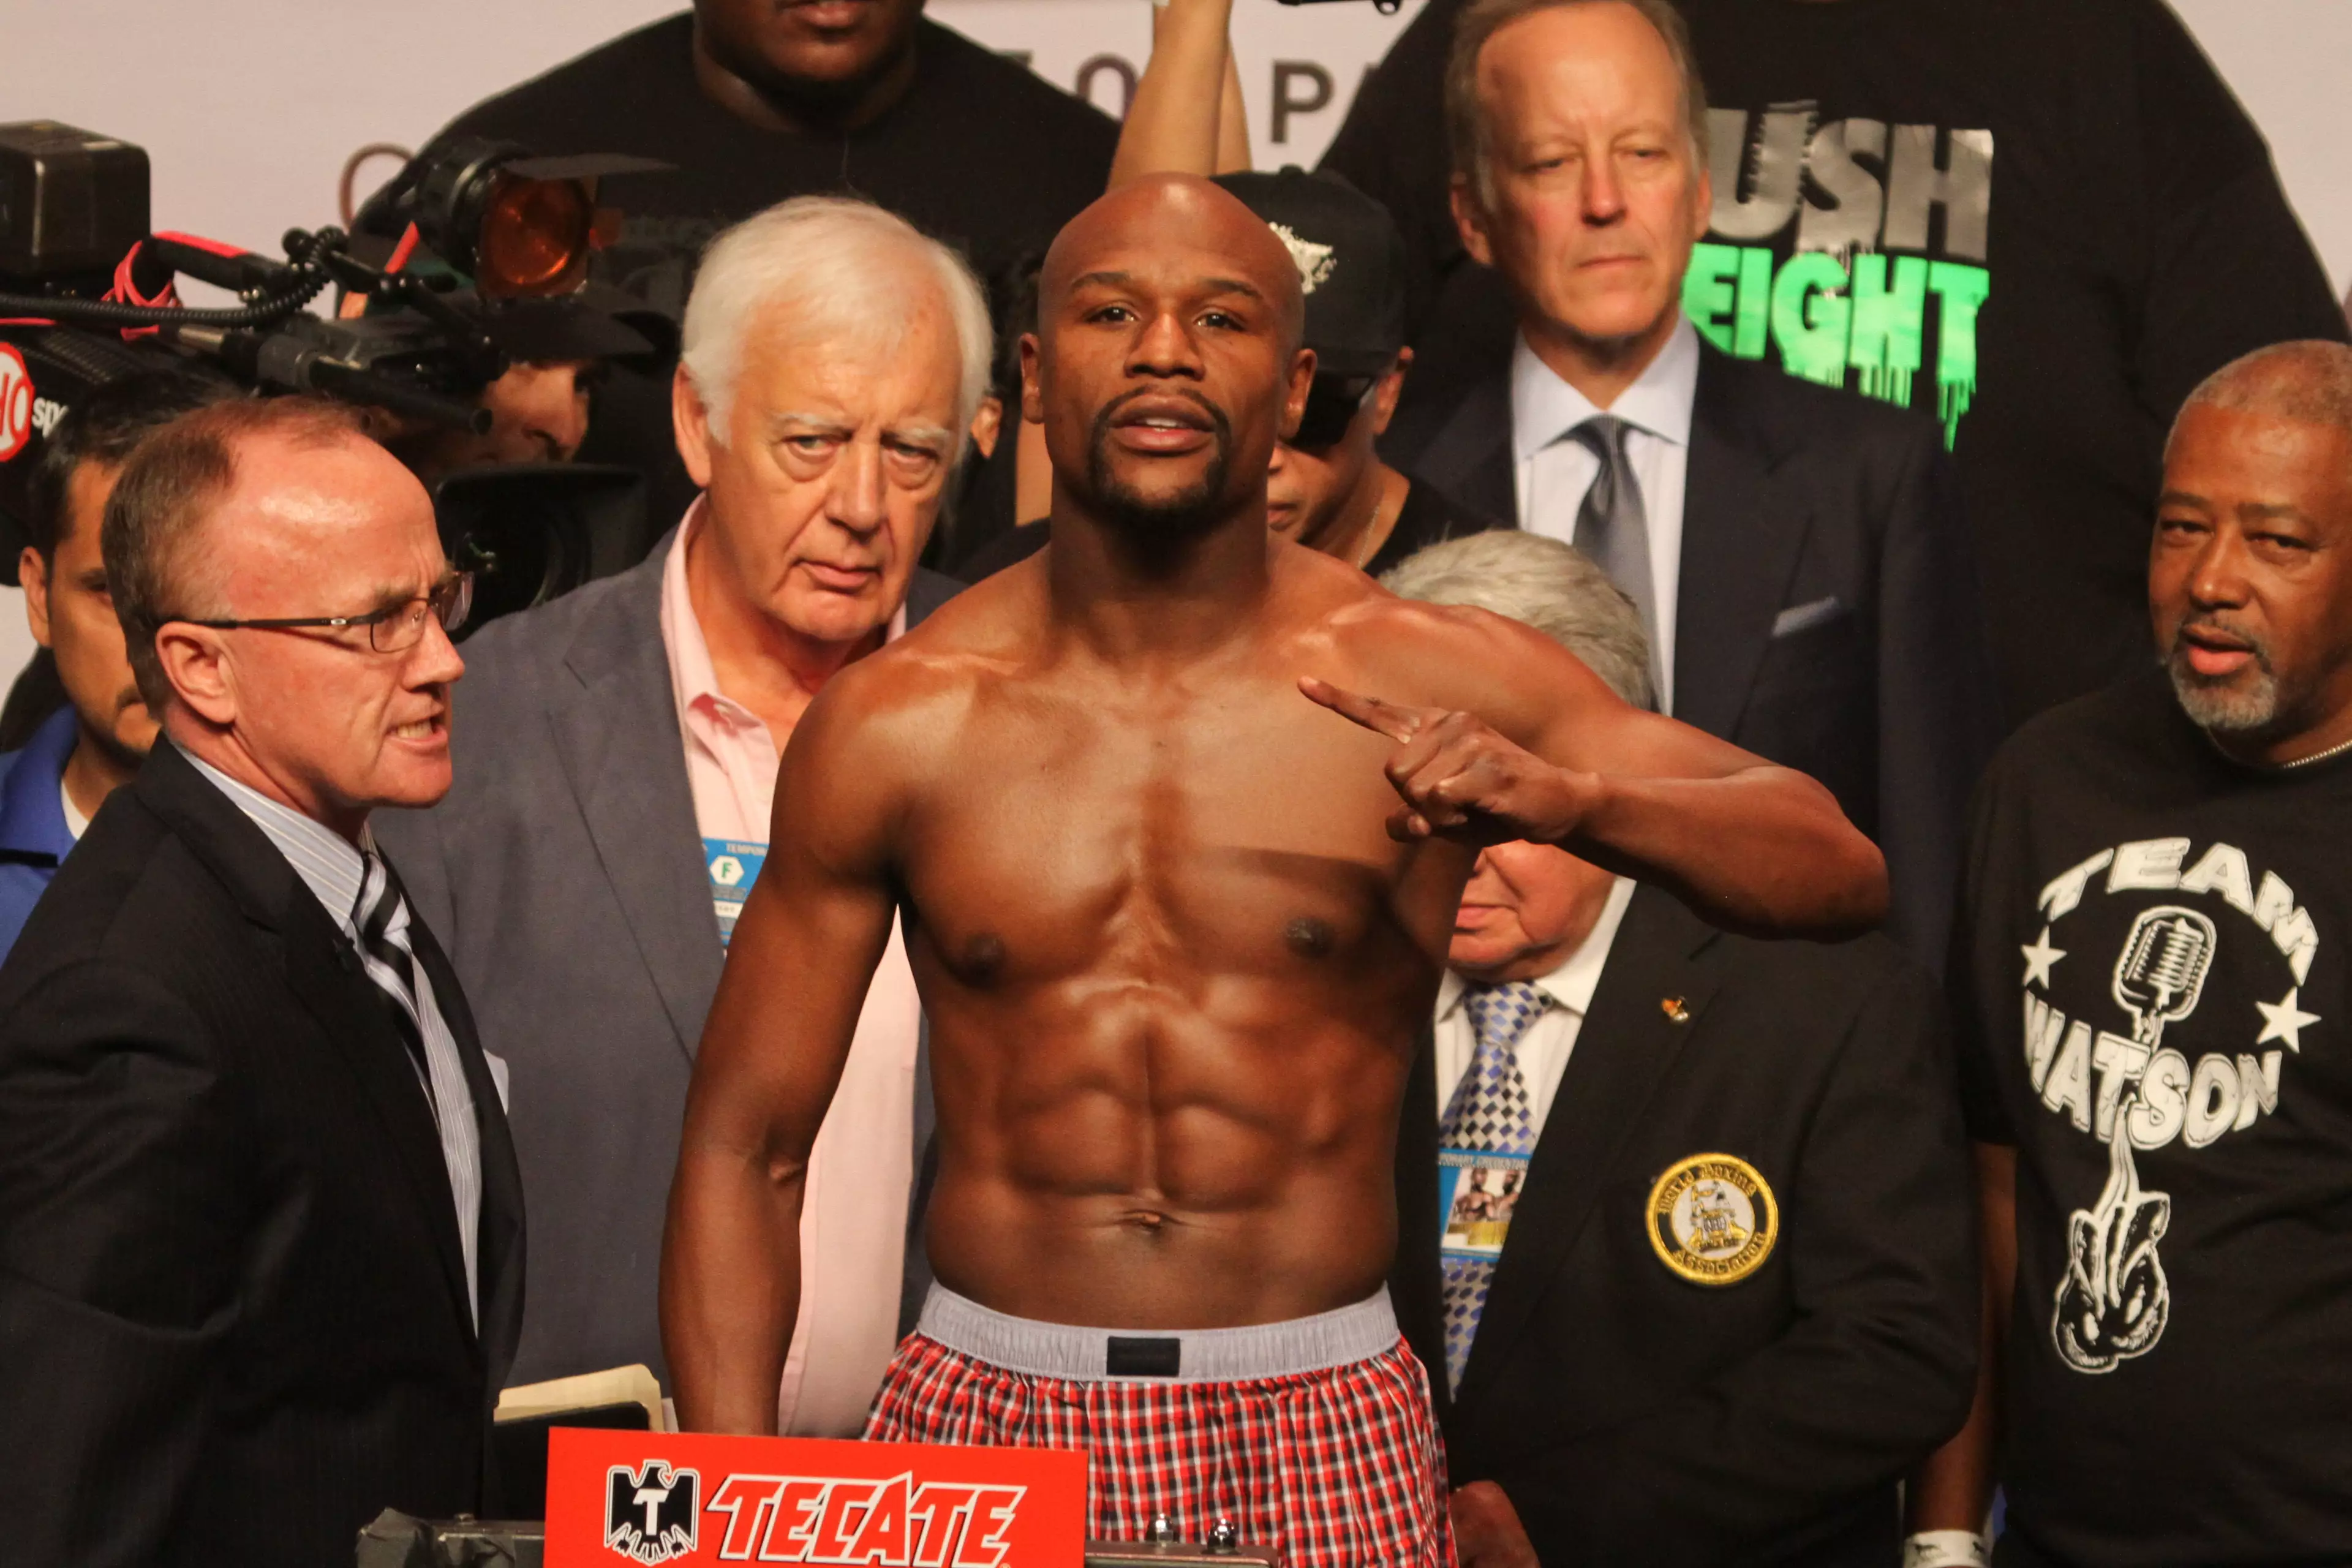 Will Mayweather be Newcastle's next owner? Image: PA Images